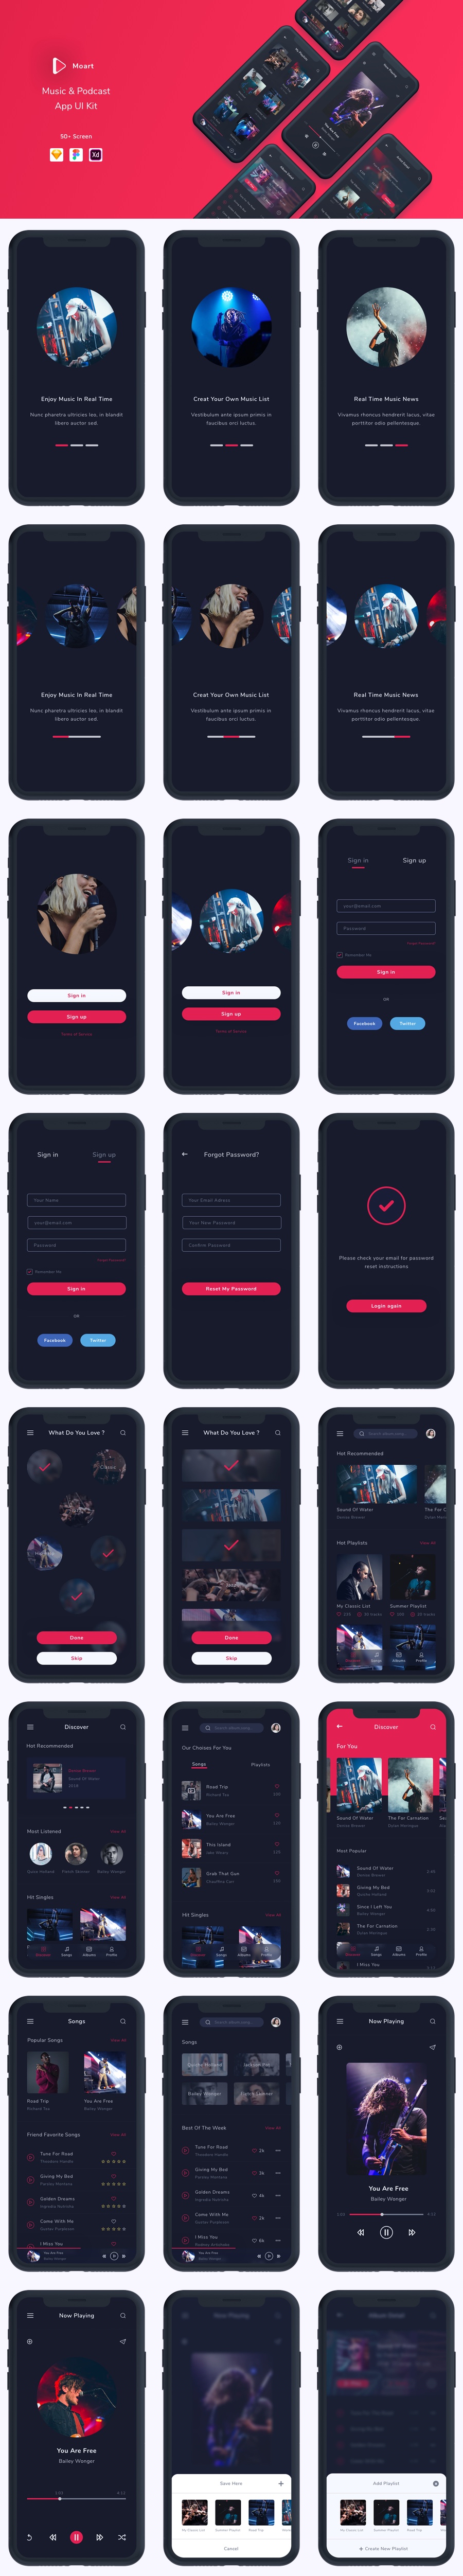 Moart - Music and Podcast App UI Kit - 2